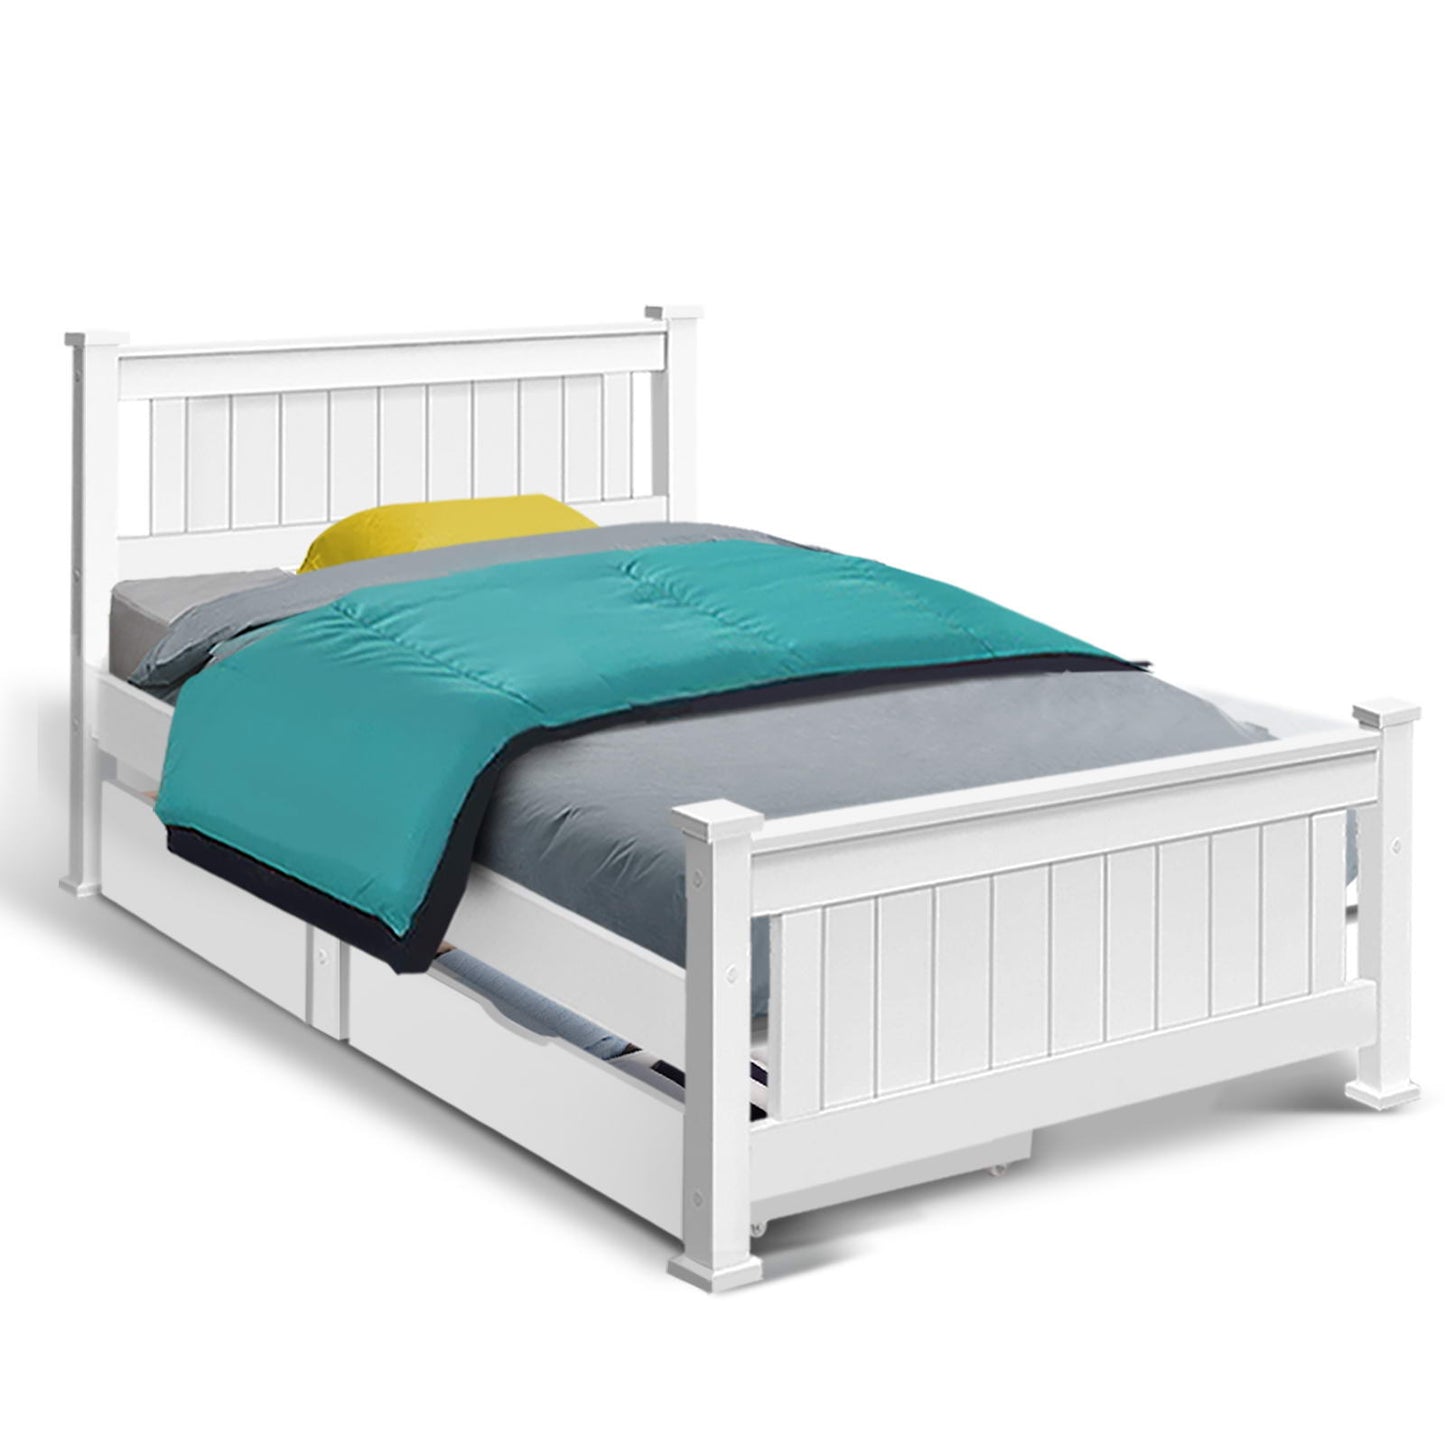 Mystique Wooden Bed Frame Timber with Storage Drawers - White Single